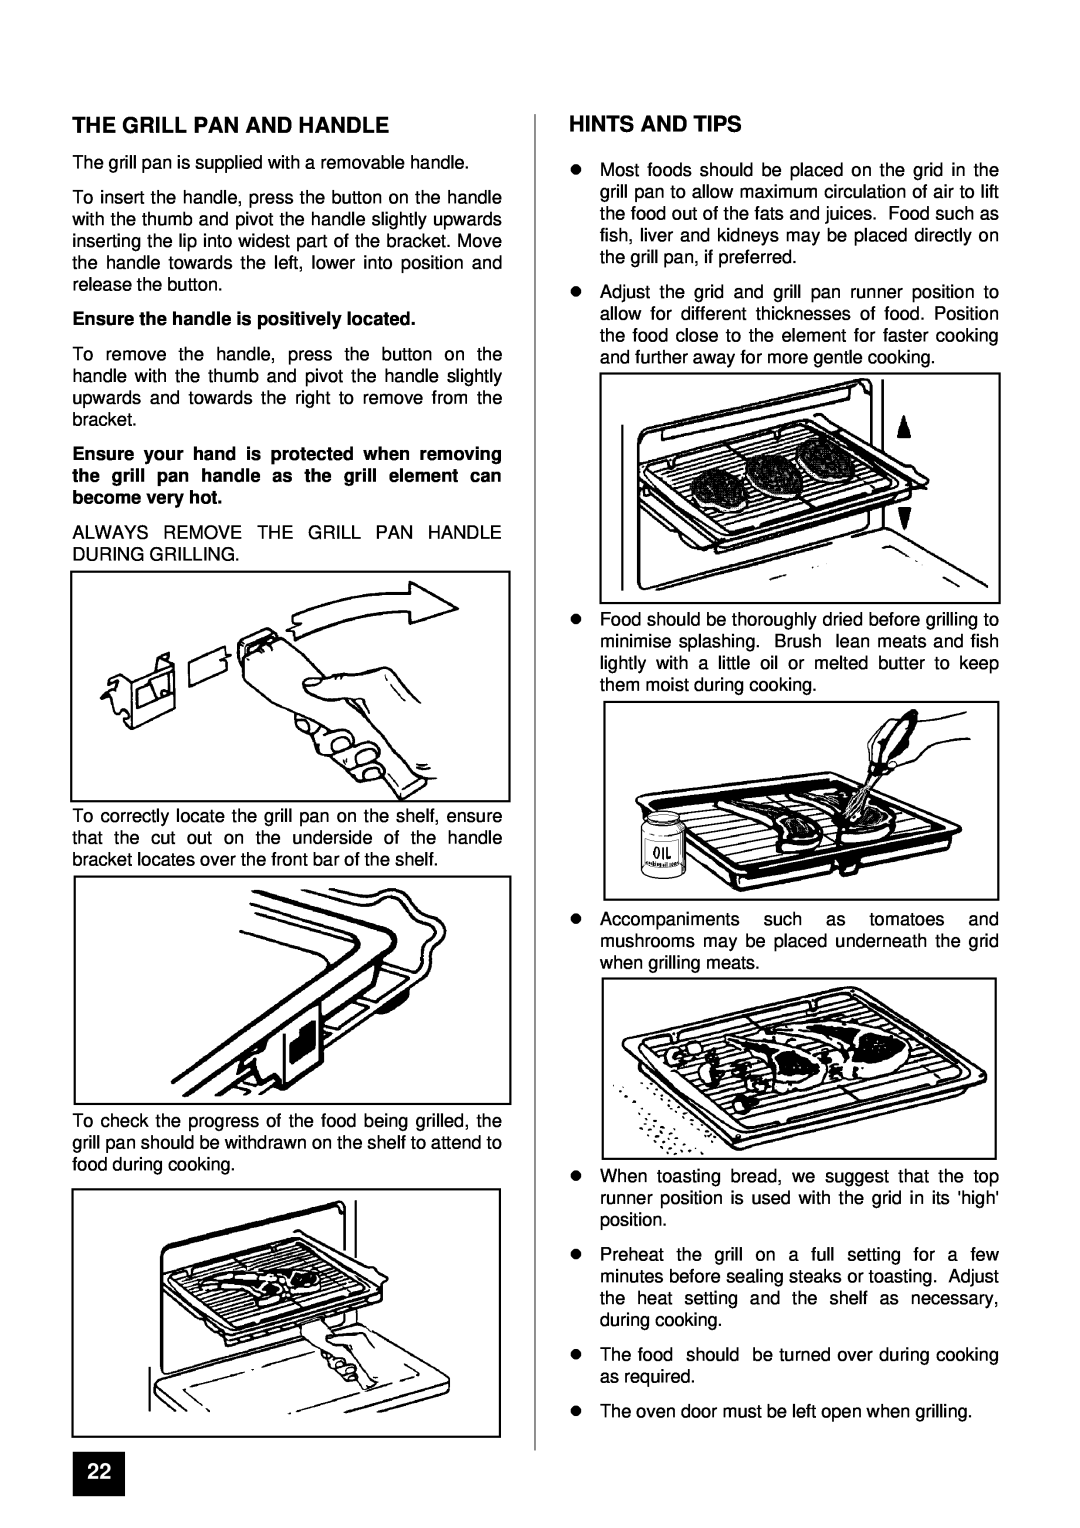 Tricity Bendix SURREY The Grill Pan And Handle, Hints And Tips, Ensure the handle is positively located 